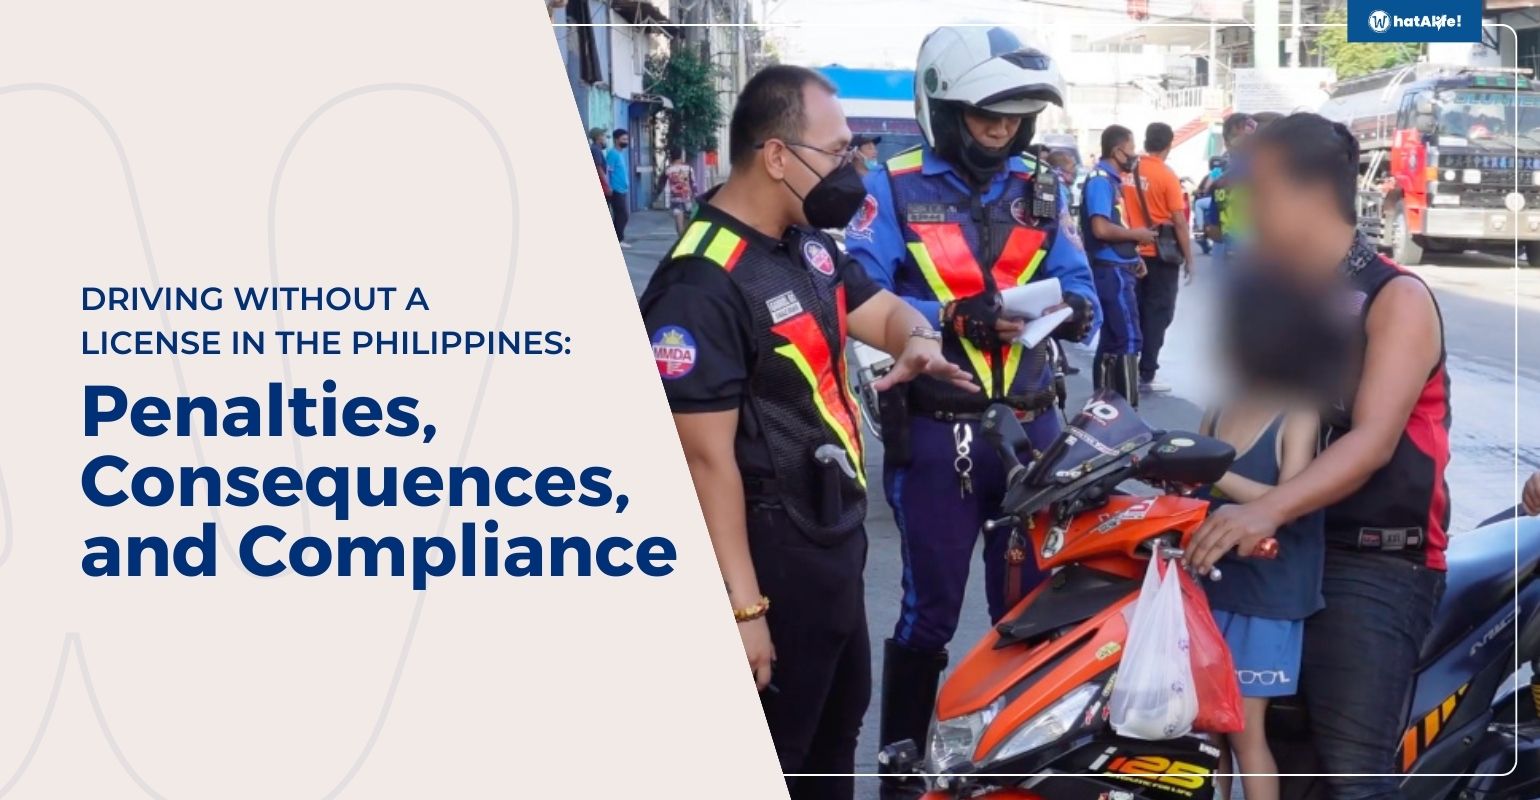 Driving Without License in the Philippines: Penalties, Consequences and, Compliance